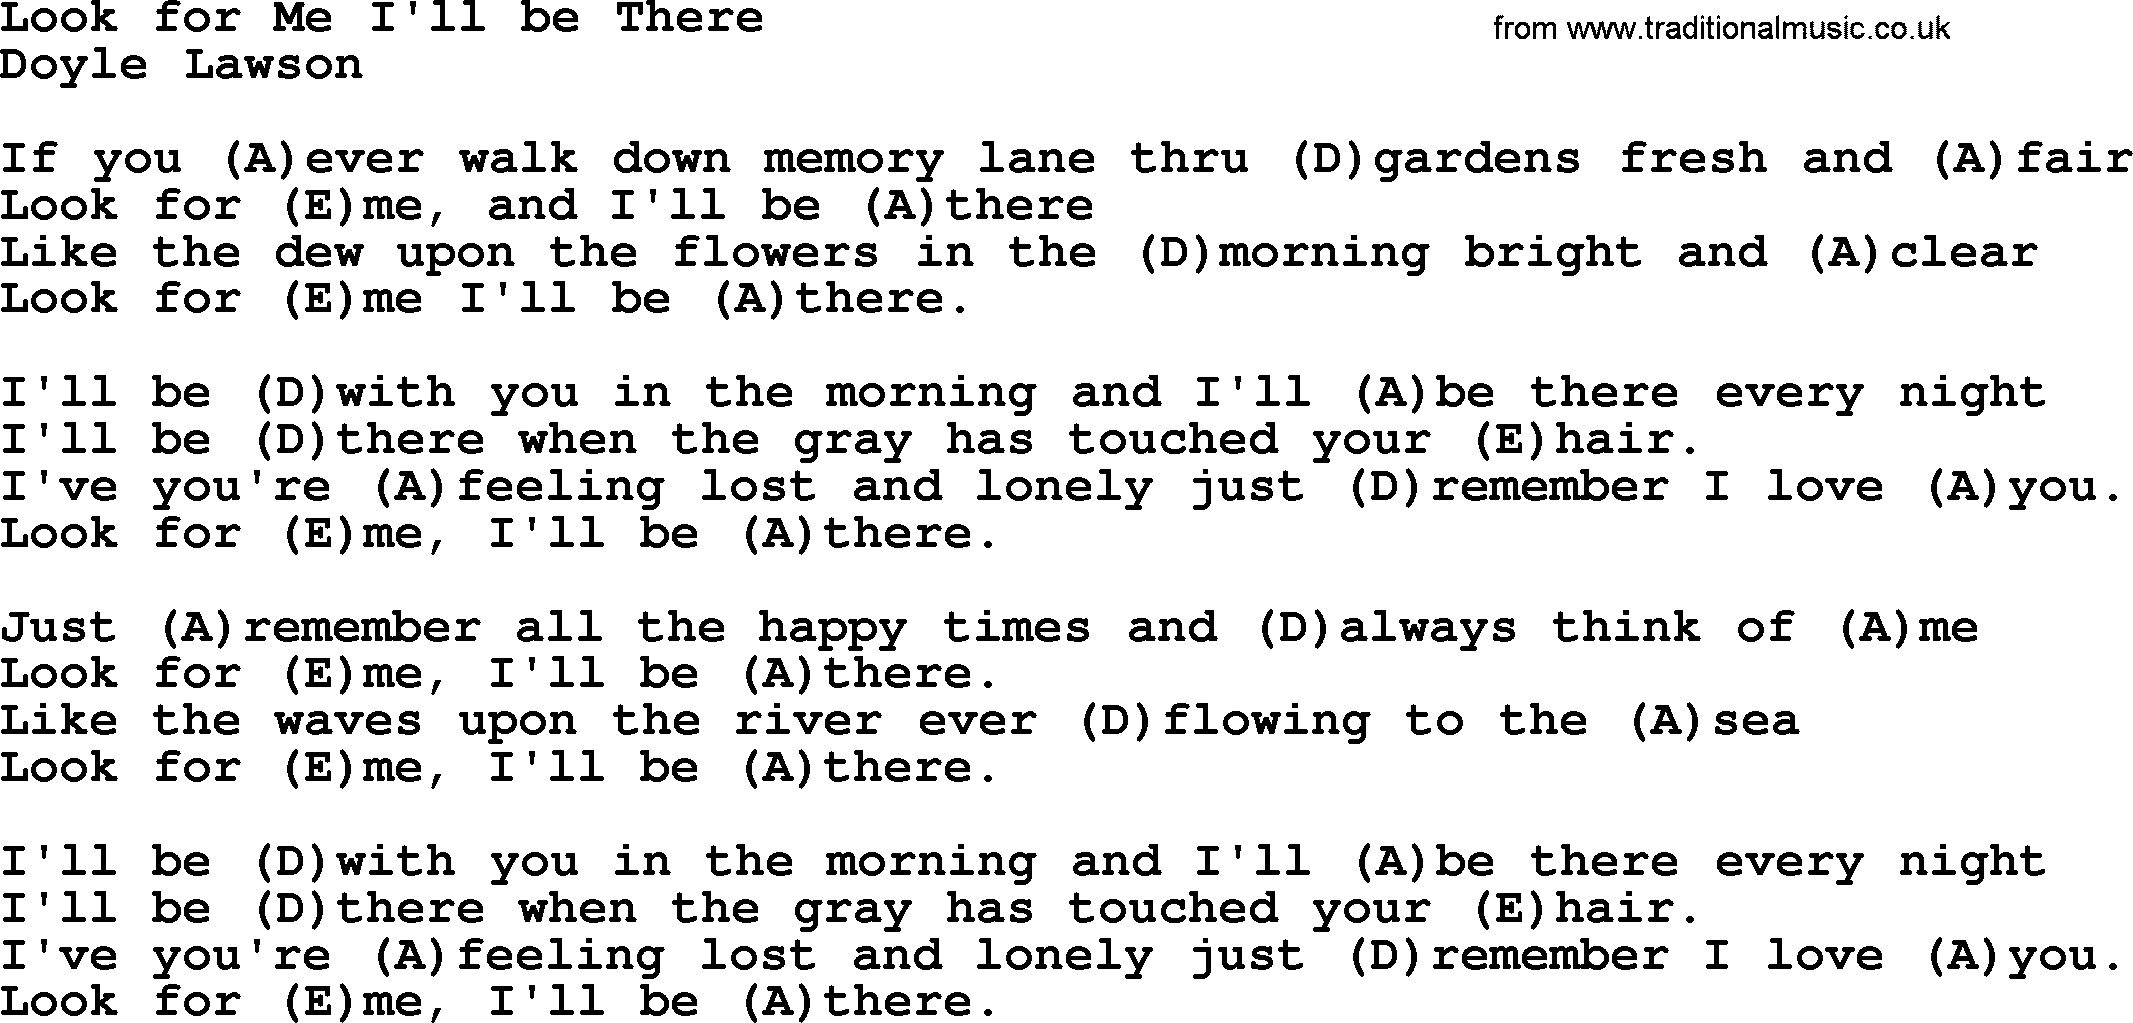 Bluegrass song: Look For Me I'll Be There, lyrics and chords